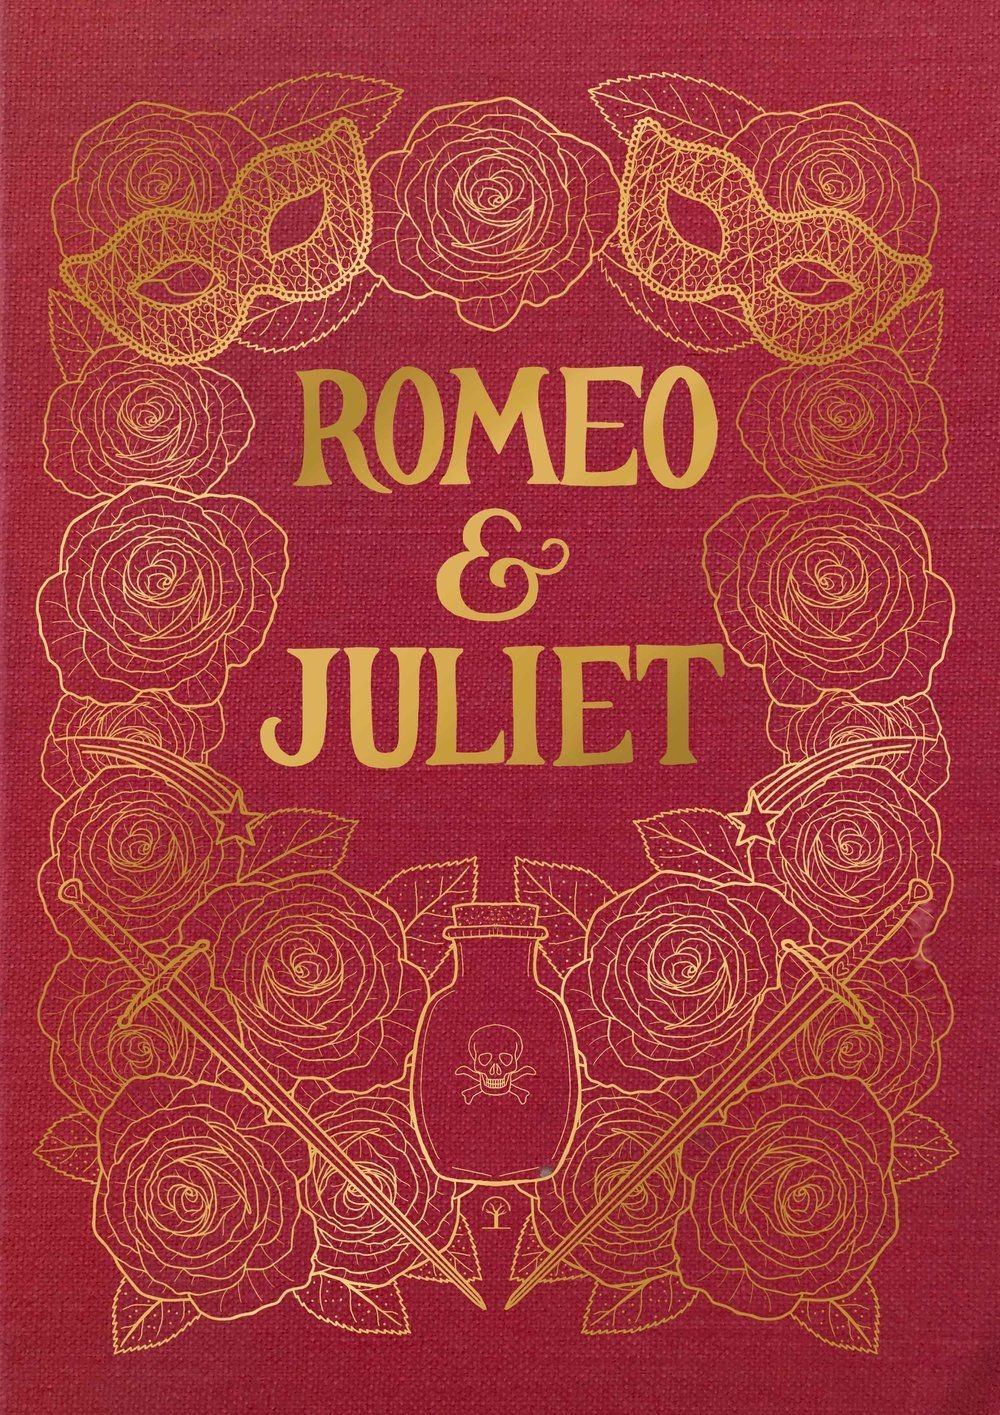 Book Review: Romeo and Juliet